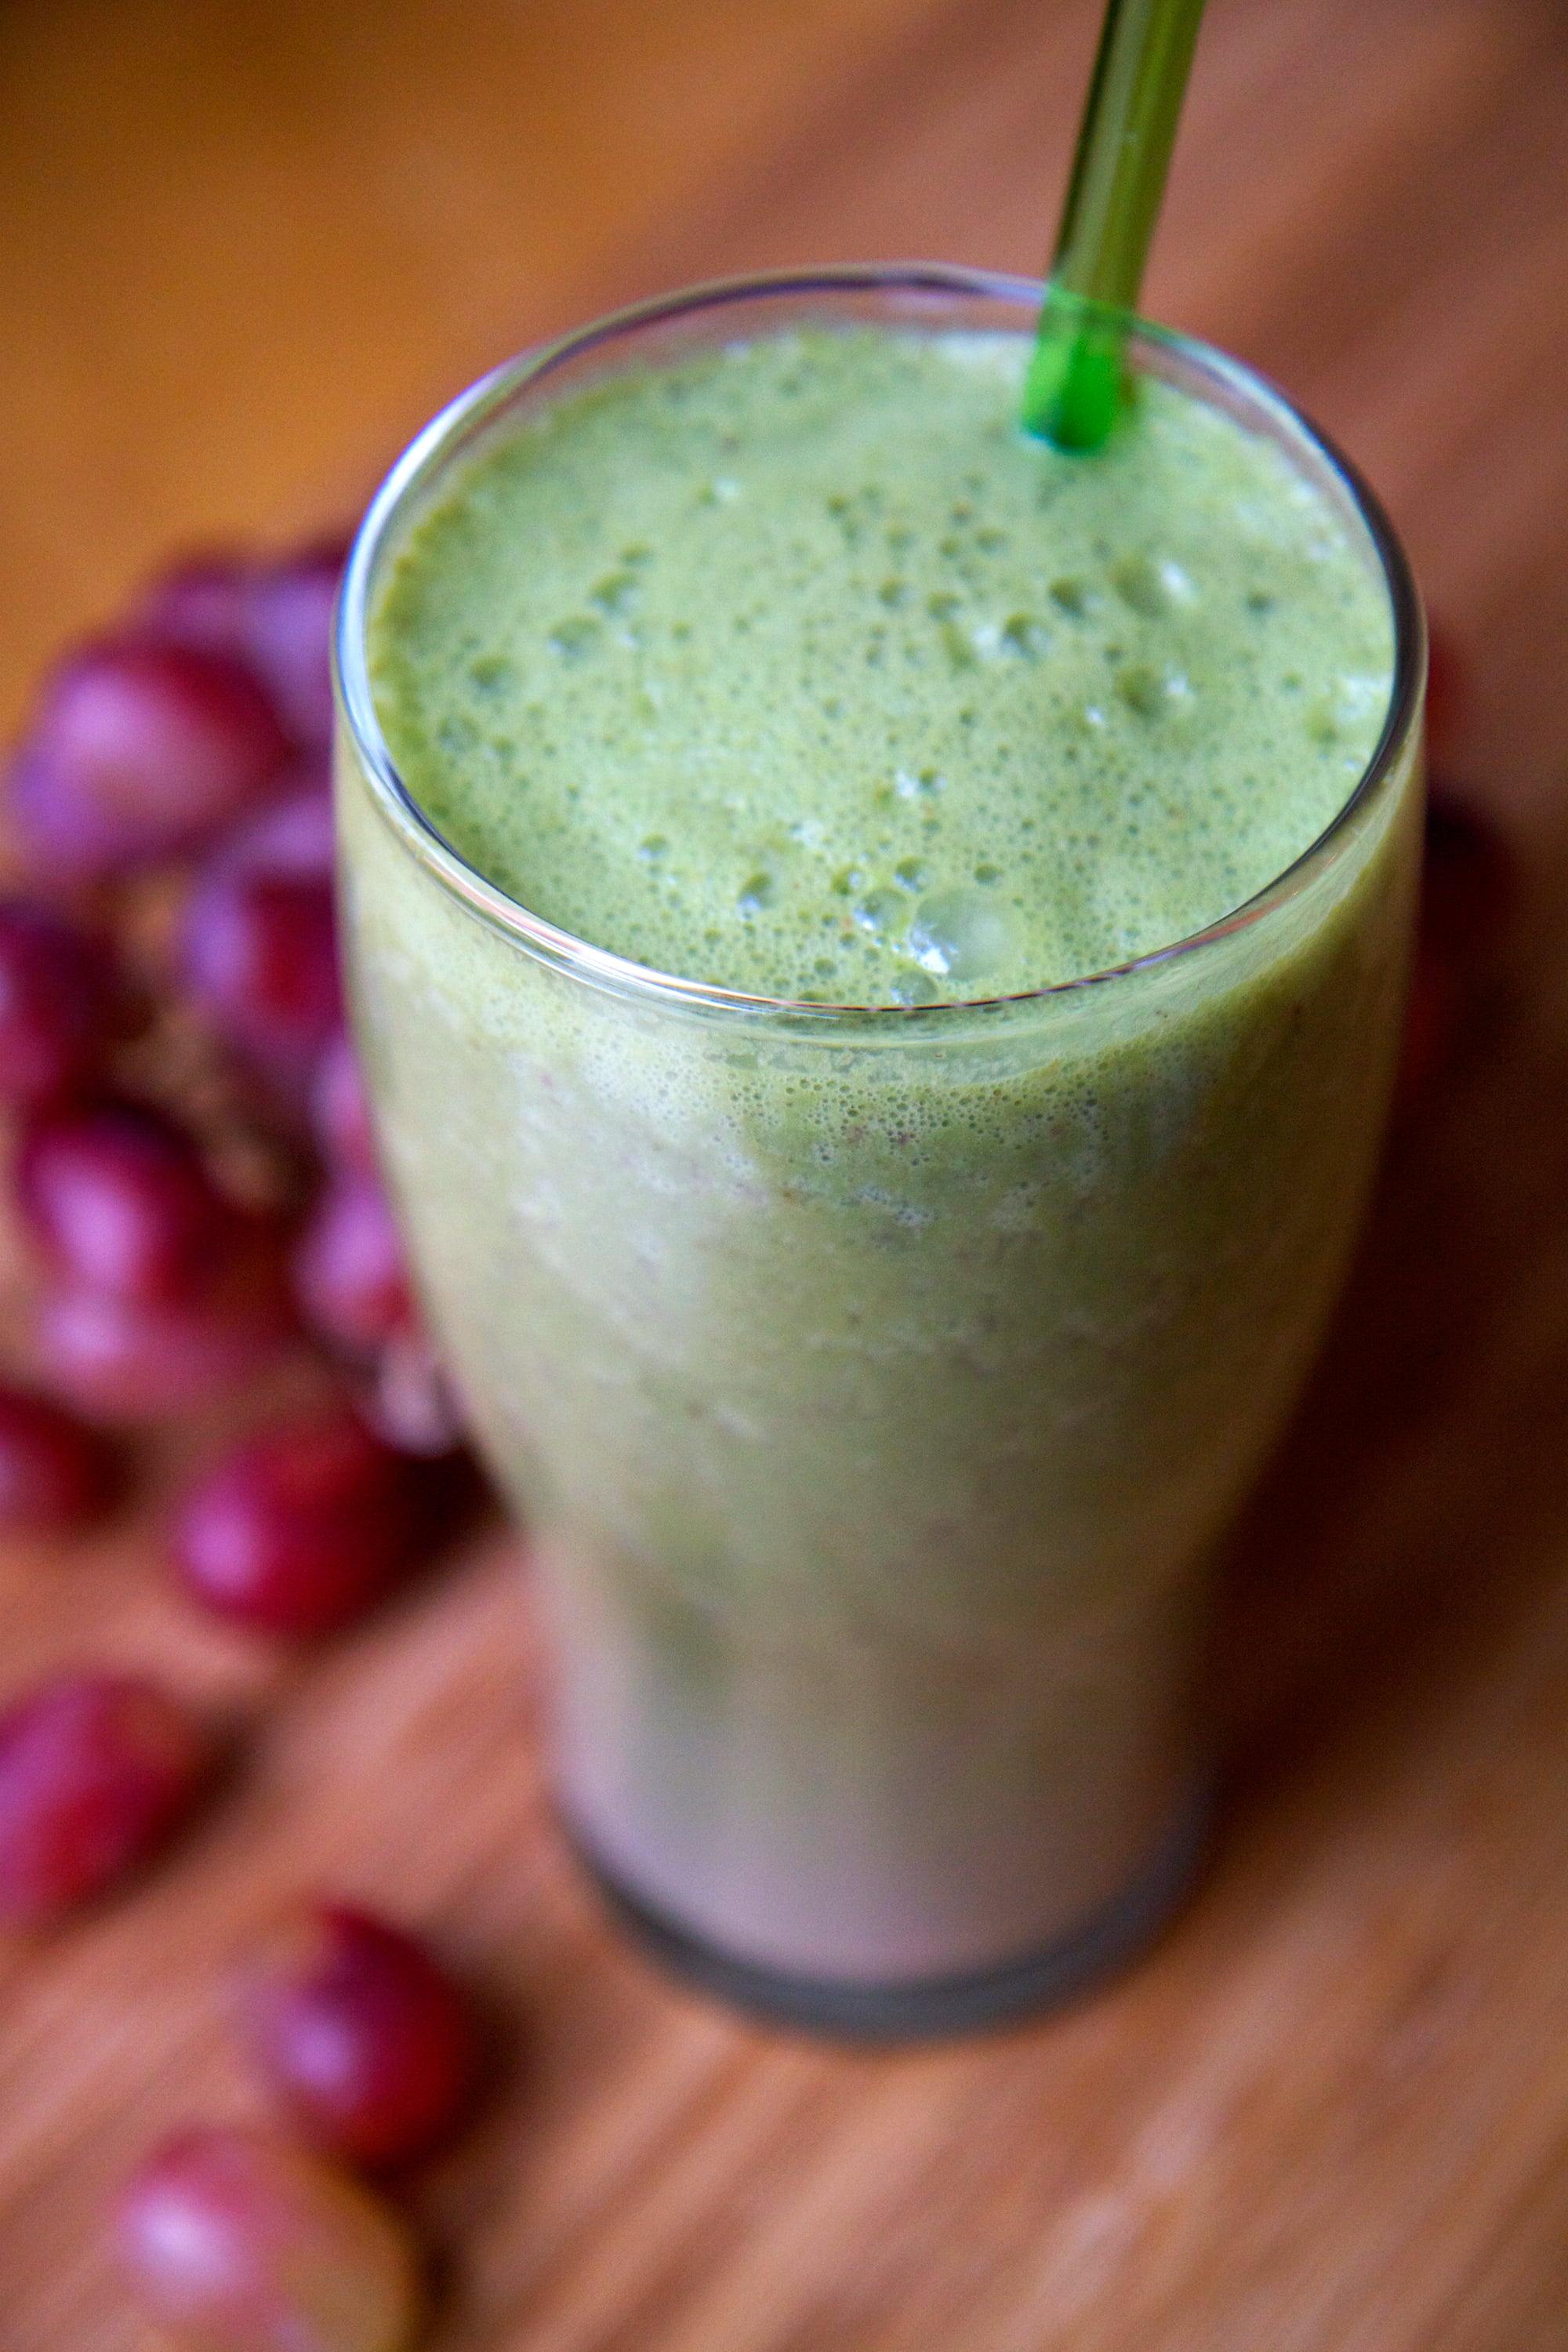 What Can I Add to My Smoothie For Weight Loss? | POPSUGAR Fitness